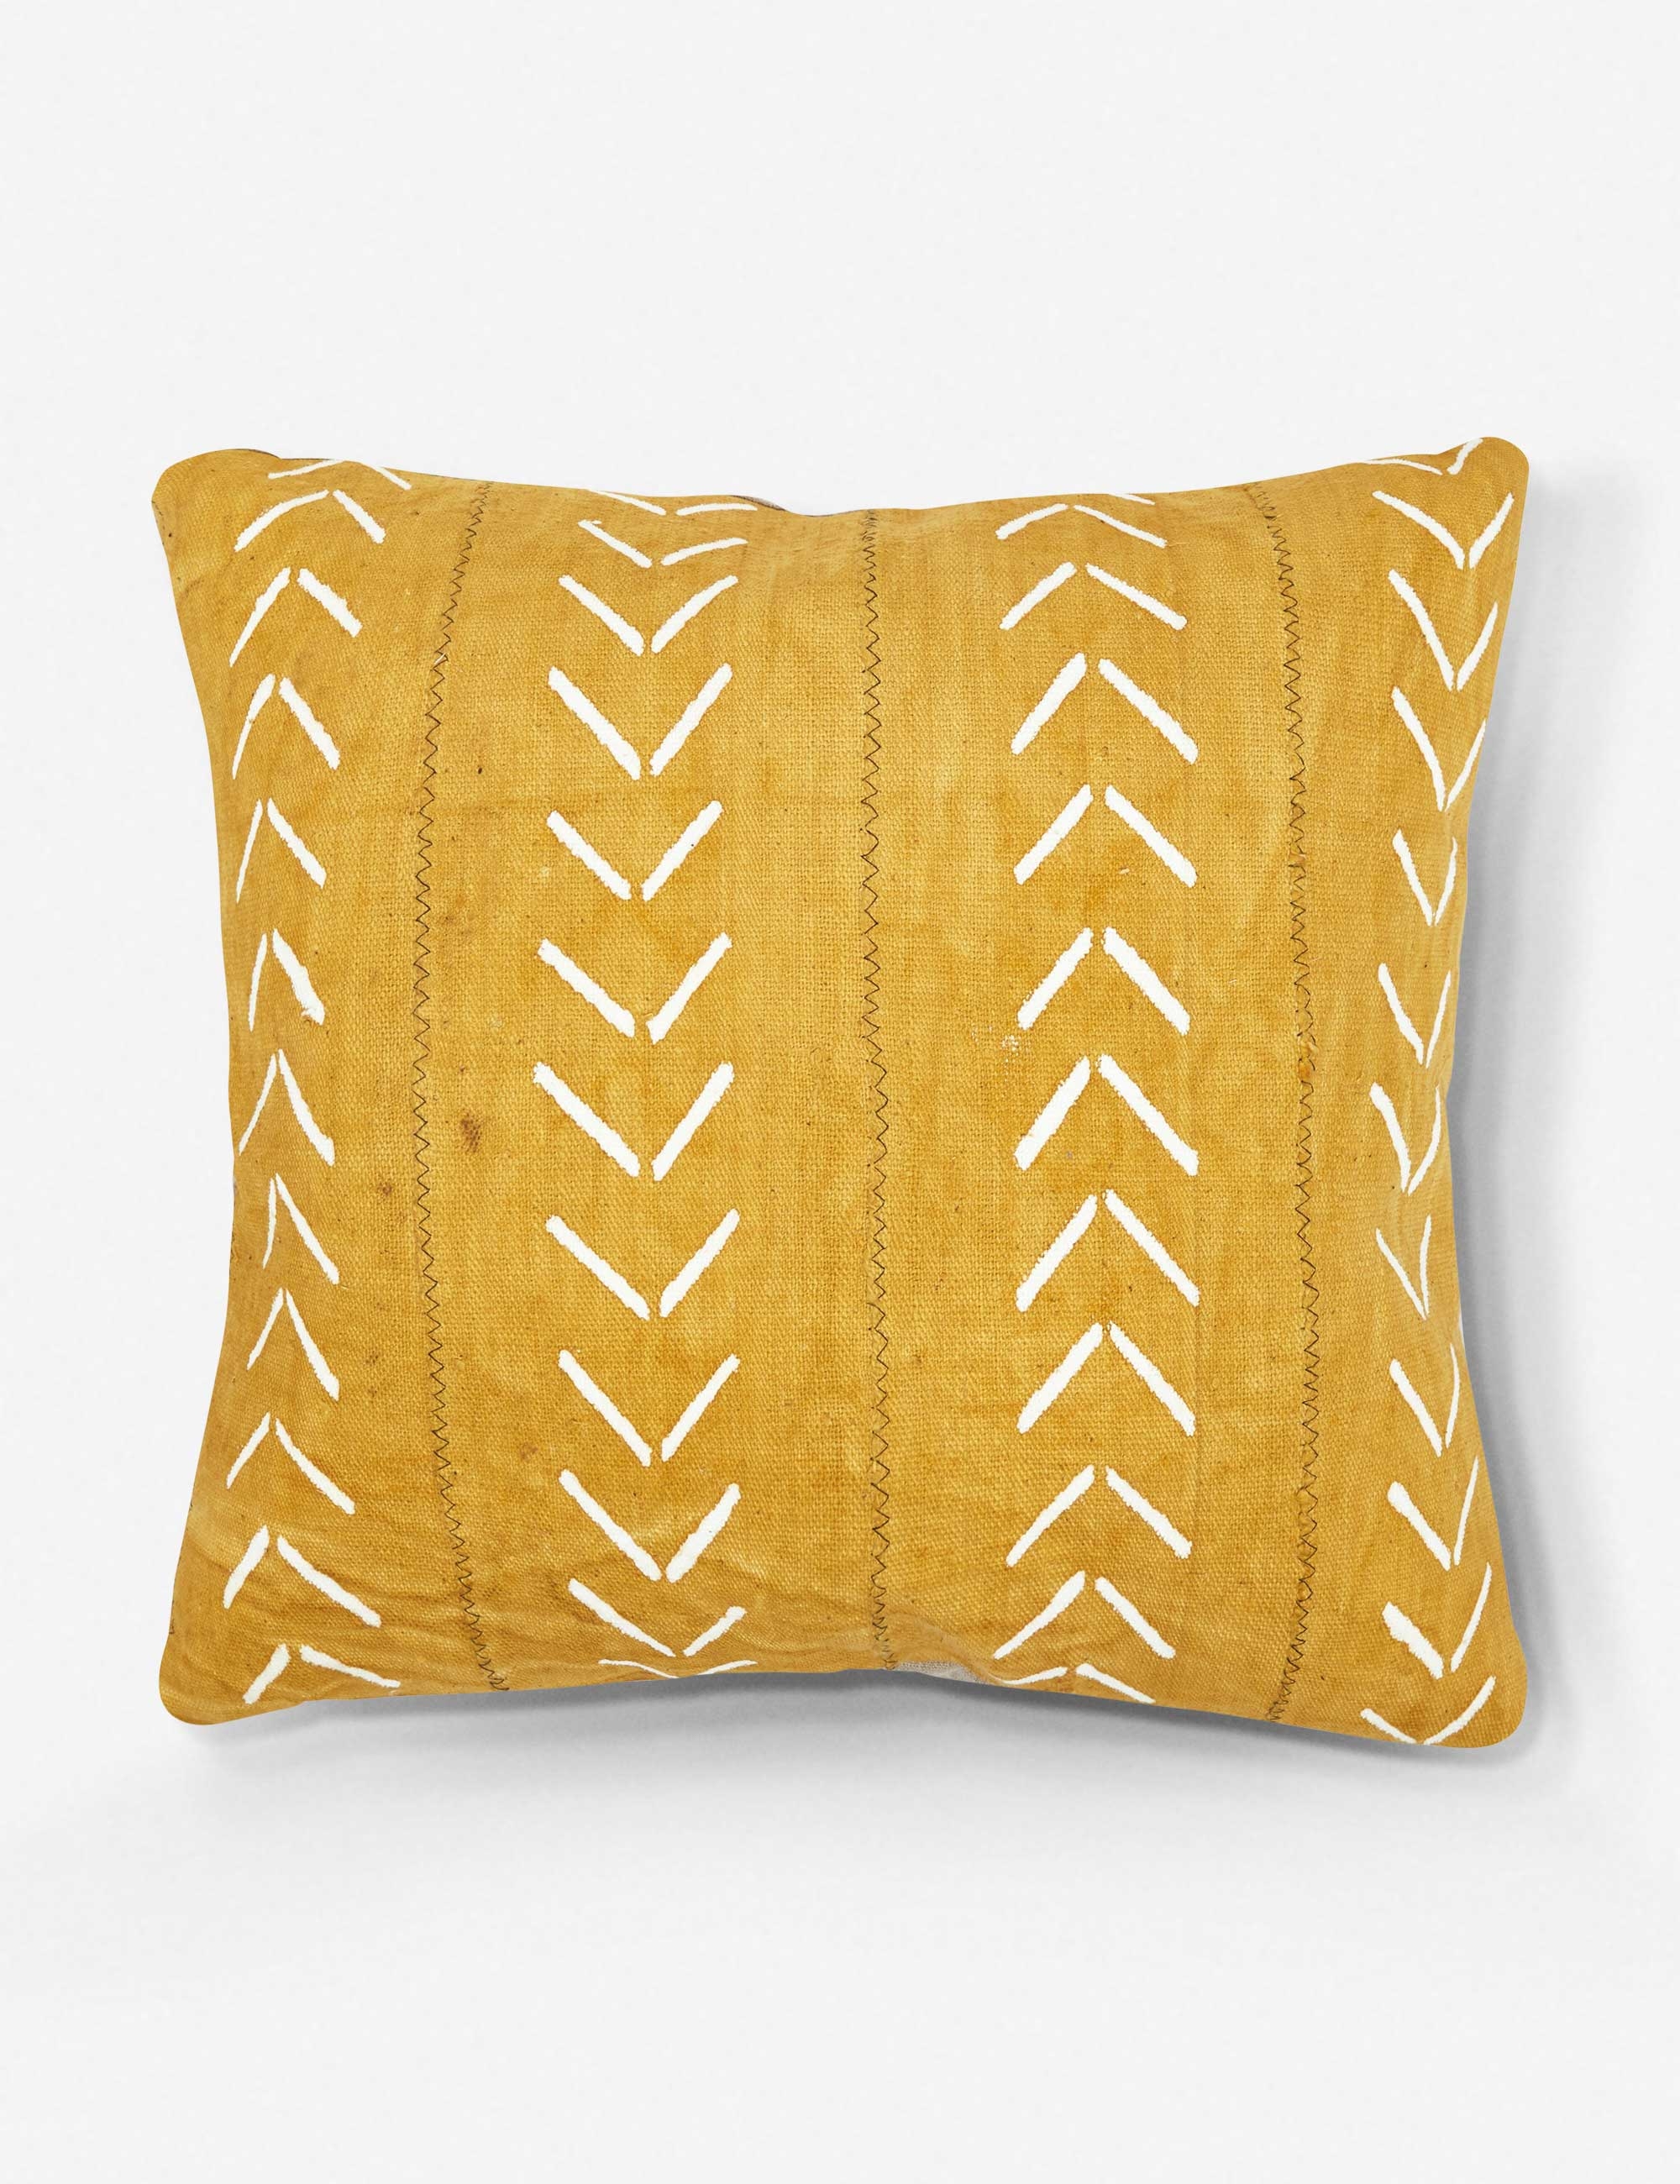 Kali One of a Kind Mudcloth Pillow - Image 0